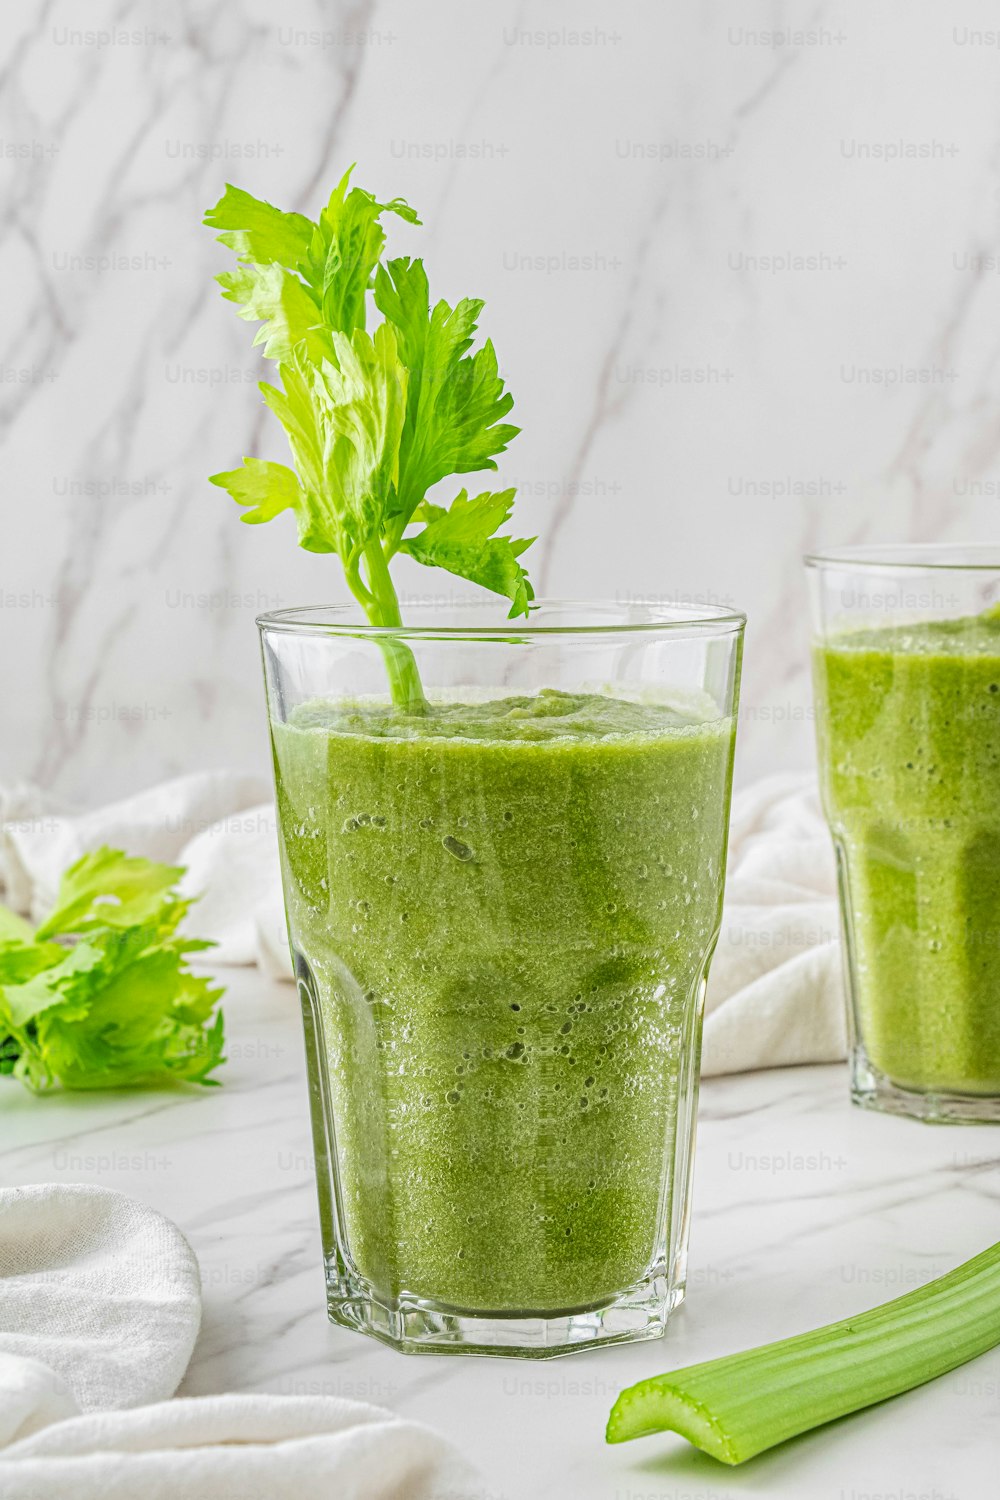 two glasses of green smoothie with a green leafy garnish